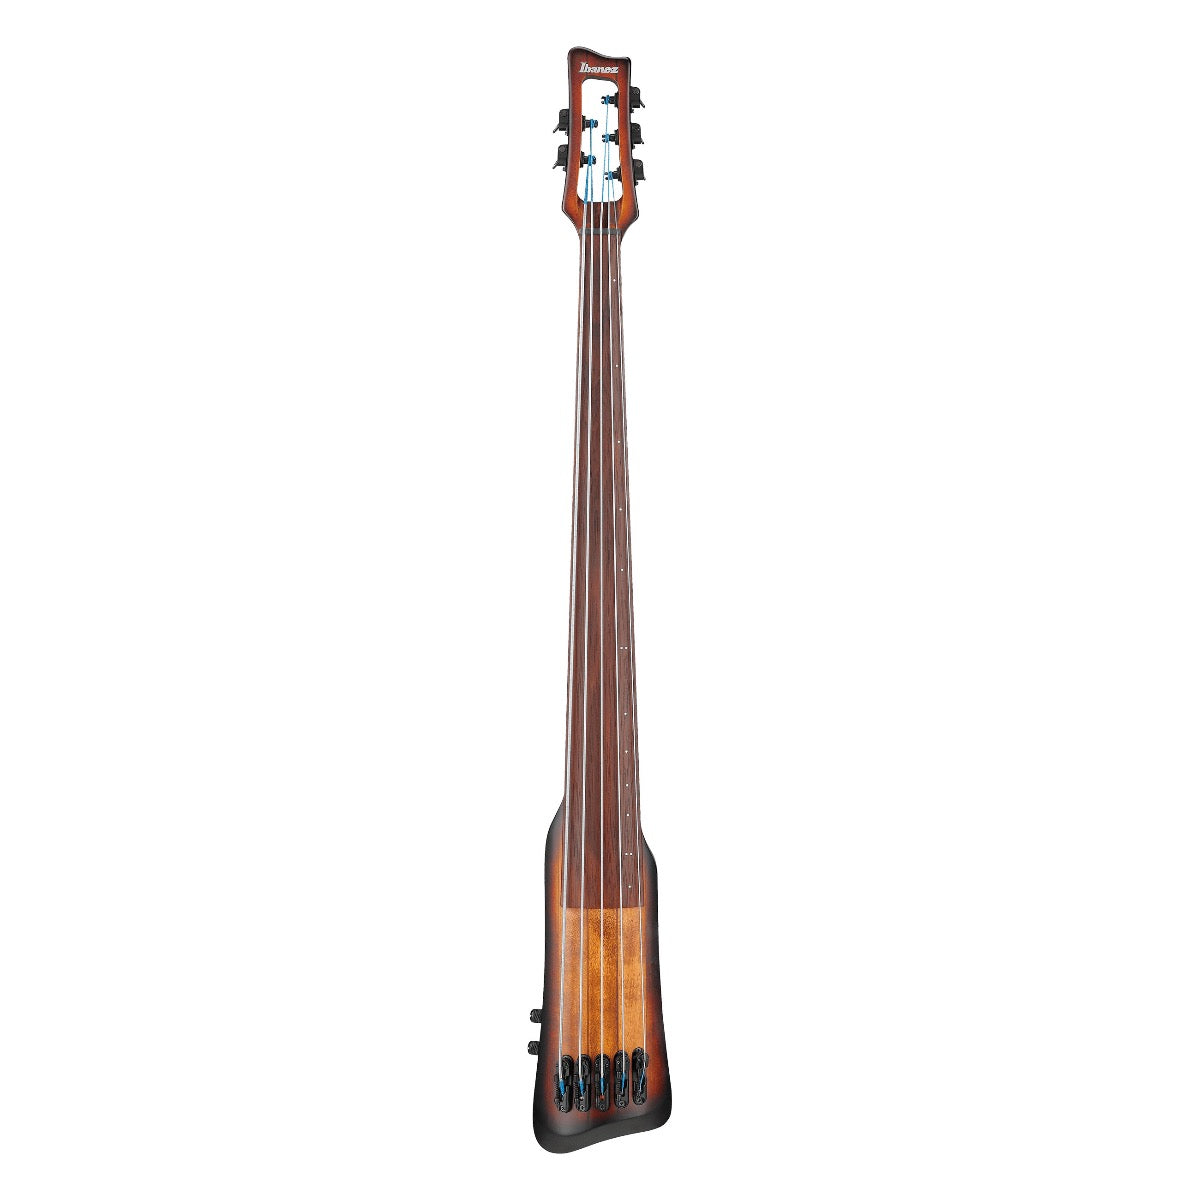 Ibanez UB805MOB Upright Fretless 5 String with Stand - Mahogany Oil Burst, View 3